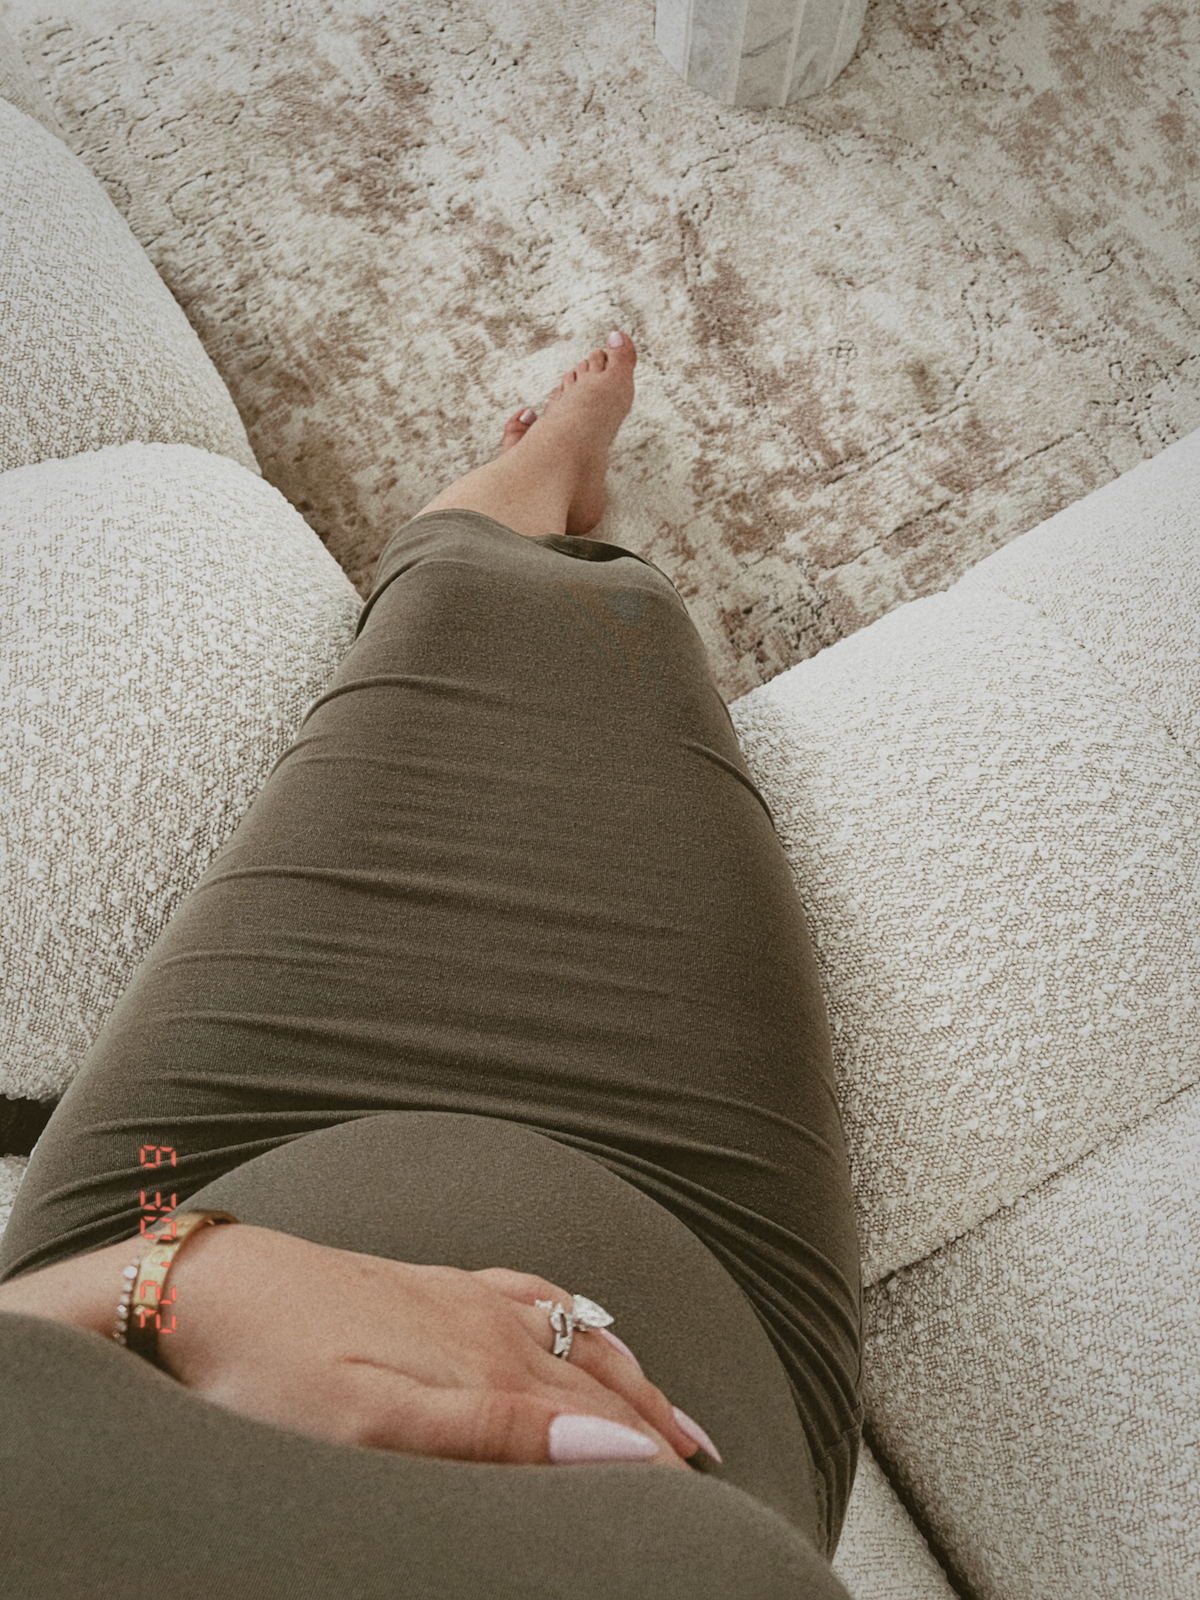 Pregnancy | Baby Bump | The Part Of Pregnancy No One Talks About